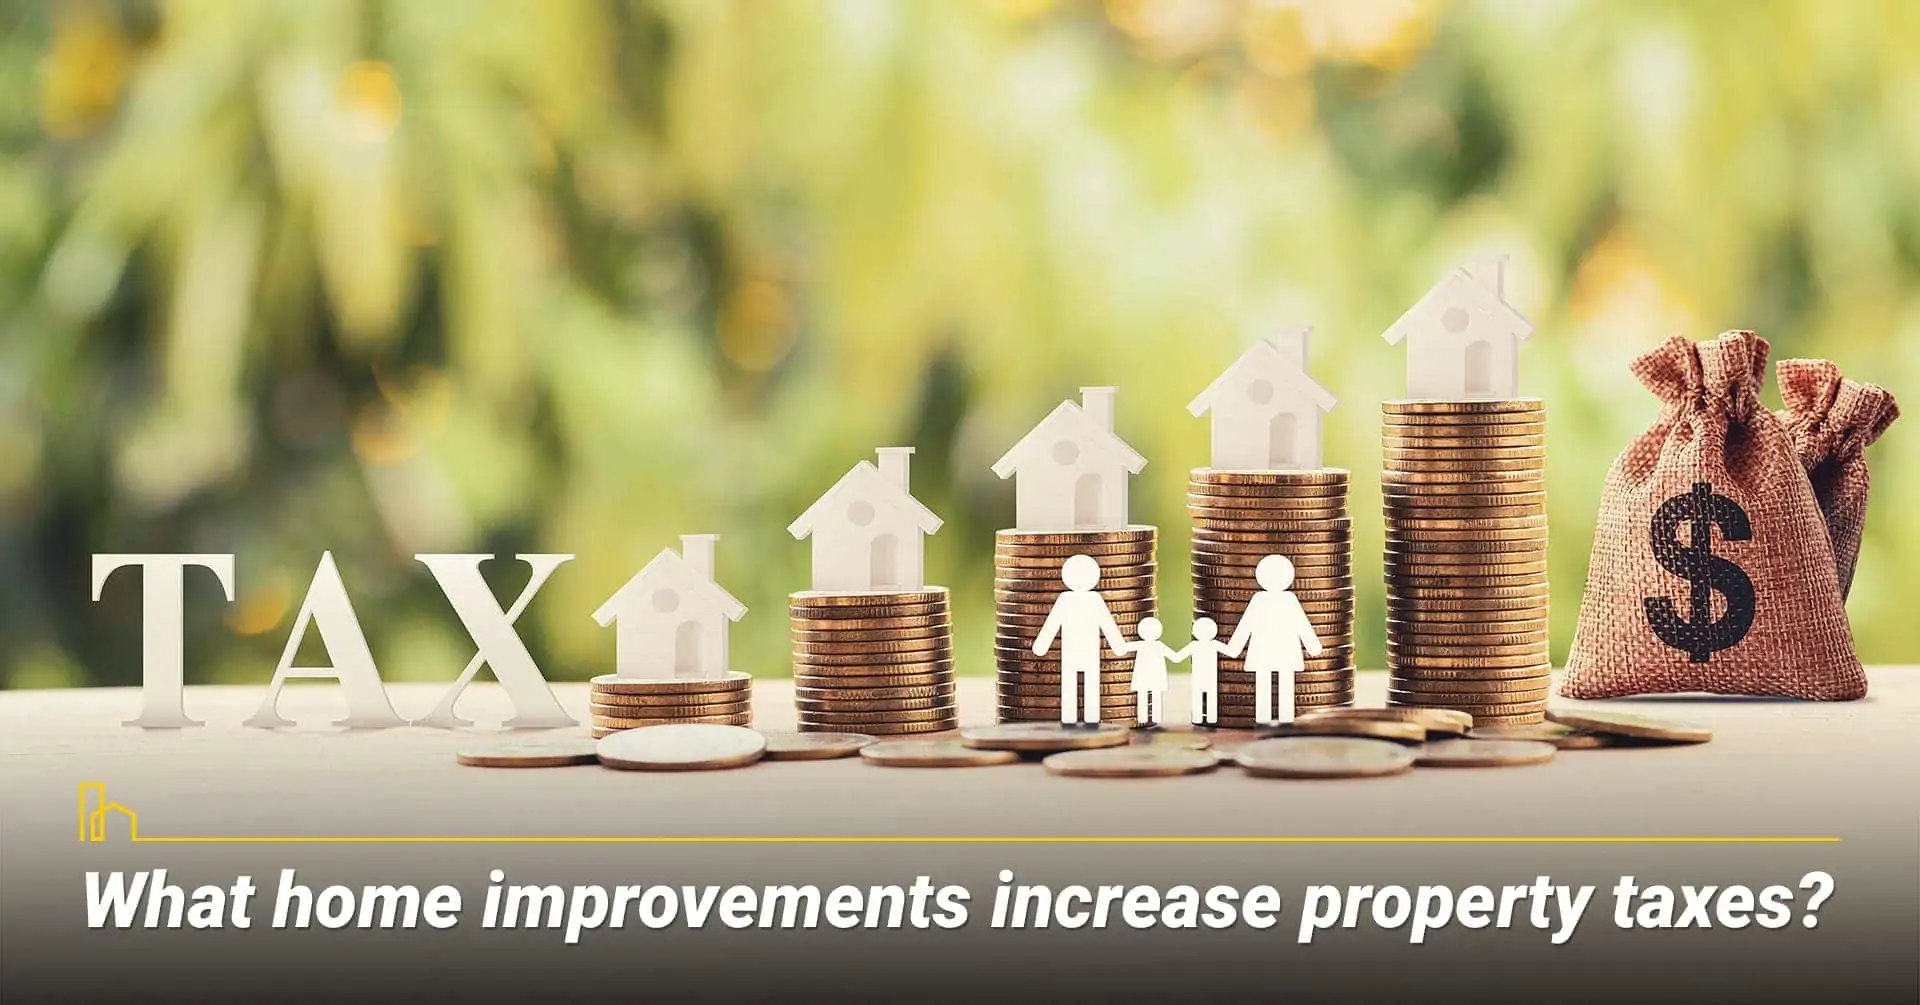 What home improvements increase property taxes? certain home improvement projects increase property taxes